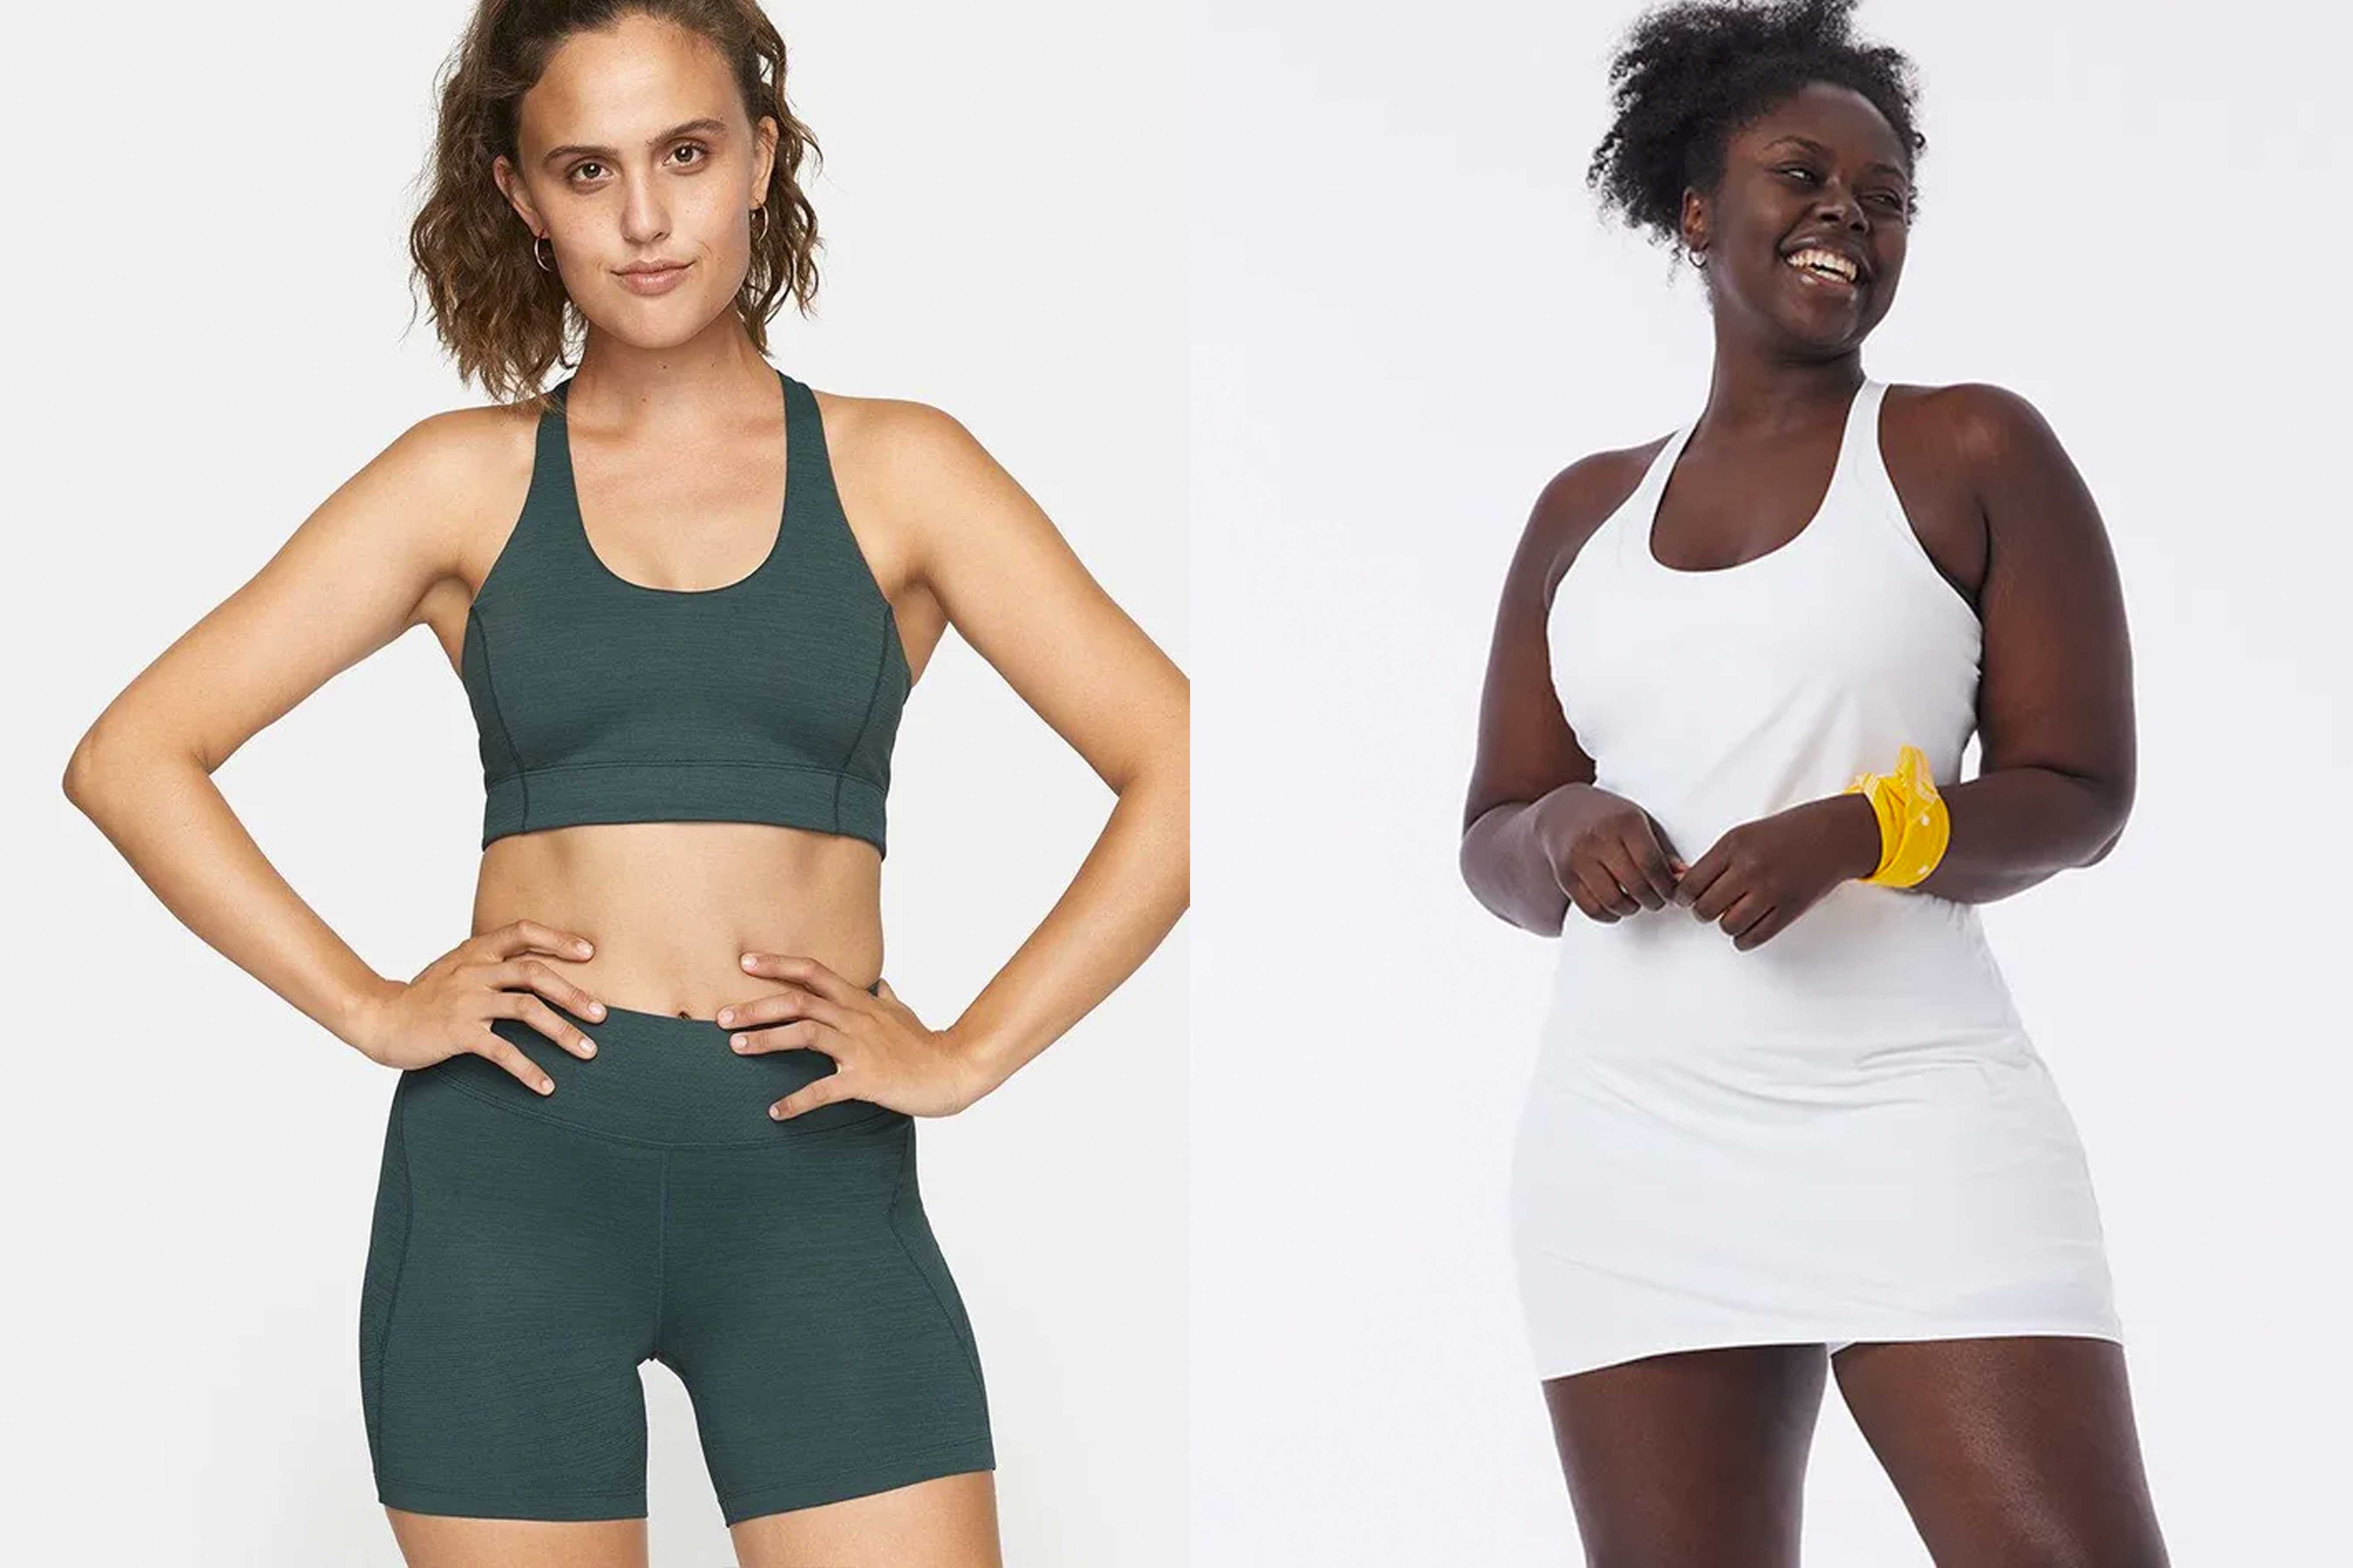 Female-Founded Activewear Brands Where You Should Buy Workout Clothes